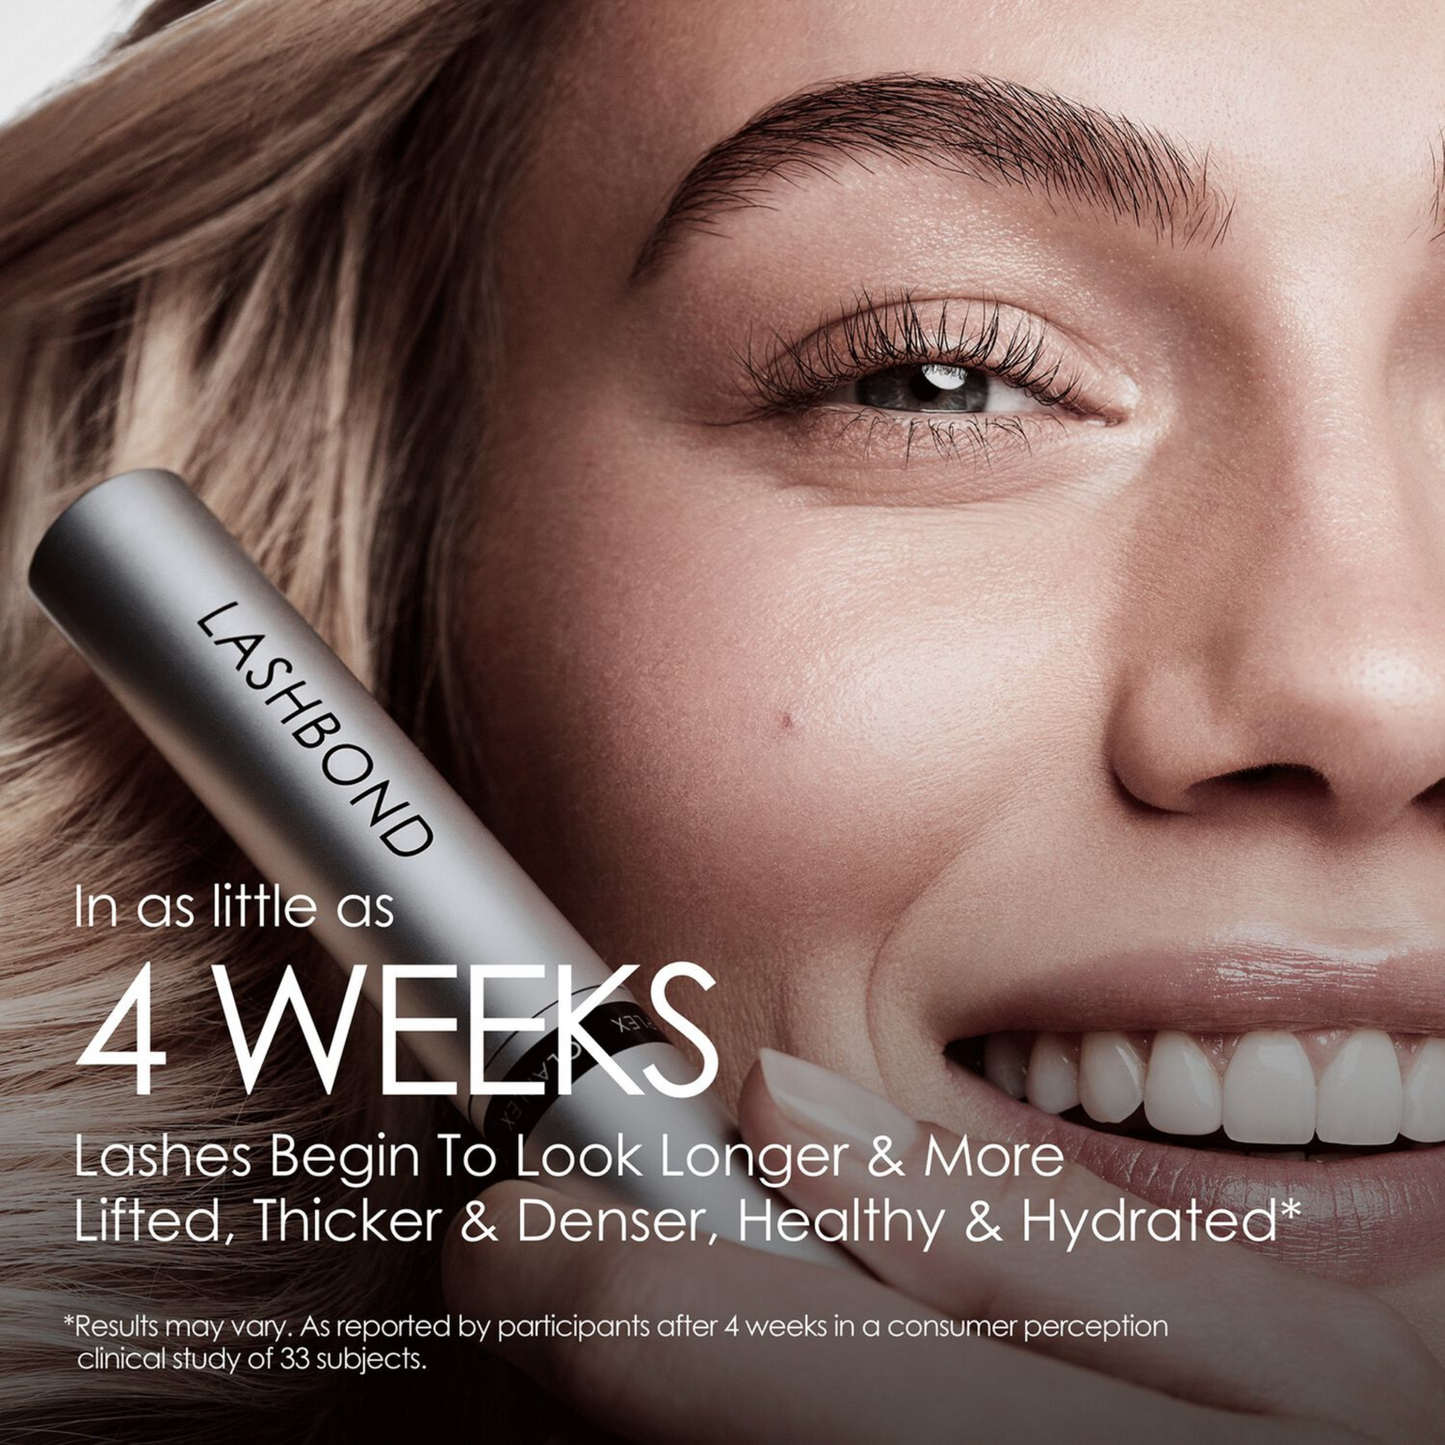 A clear, lightweight lash serum for the look of longer, thicker, healthier lashes in as little as 4 weeks. Lashes look longer & more lifted. Lashes look thicker & denser. Lashes look healthy & hydrated. Supports lash growth. Improves lash retention. Supports lash repair and hydration. .15fl oz of LashBond = 90 Day Supply